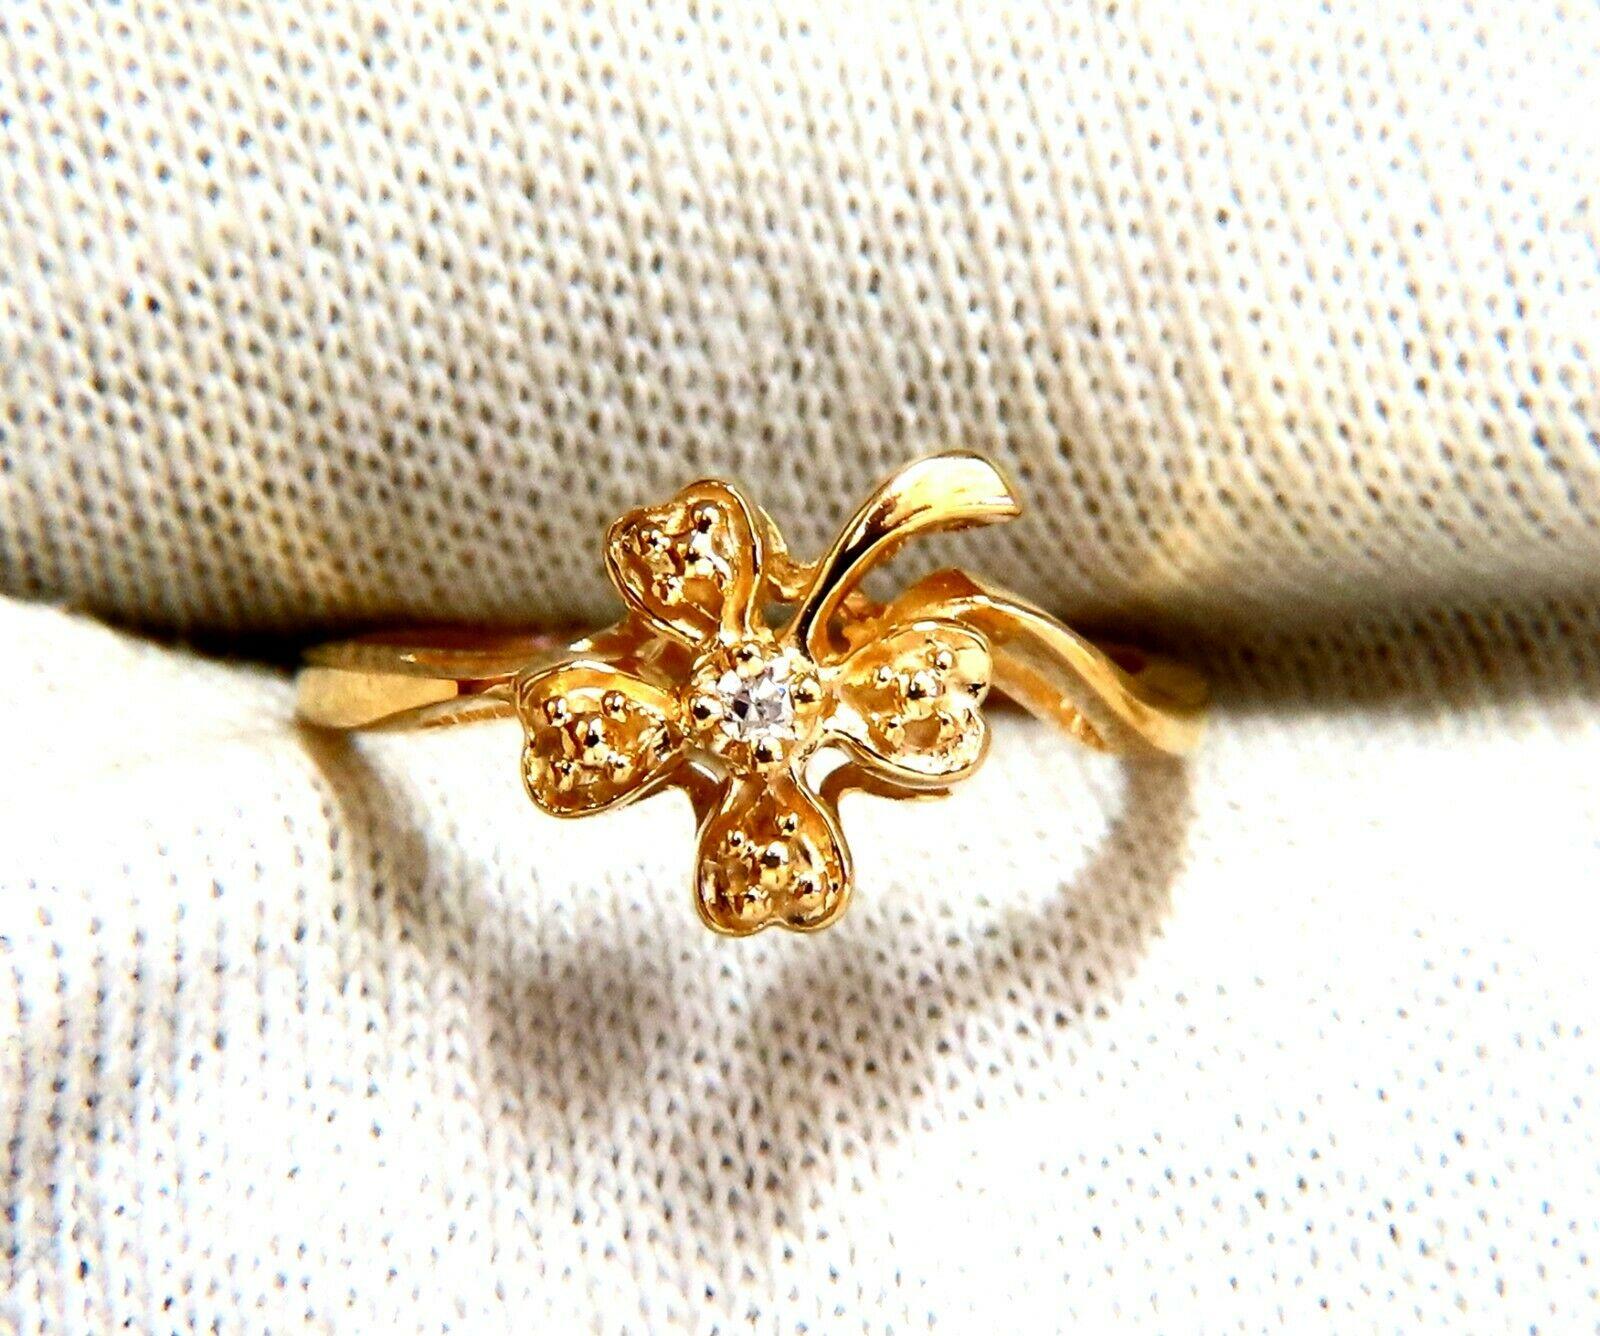 Irish Clover Deco

.03ct  Natural Round Cut Diamonds. 

14kt yellow gold

2.9 Grams

Overall ring: 9.8mm wide

Depth: 5.6mm

Current ring size: 7.75

May professionally resize, please inquire.